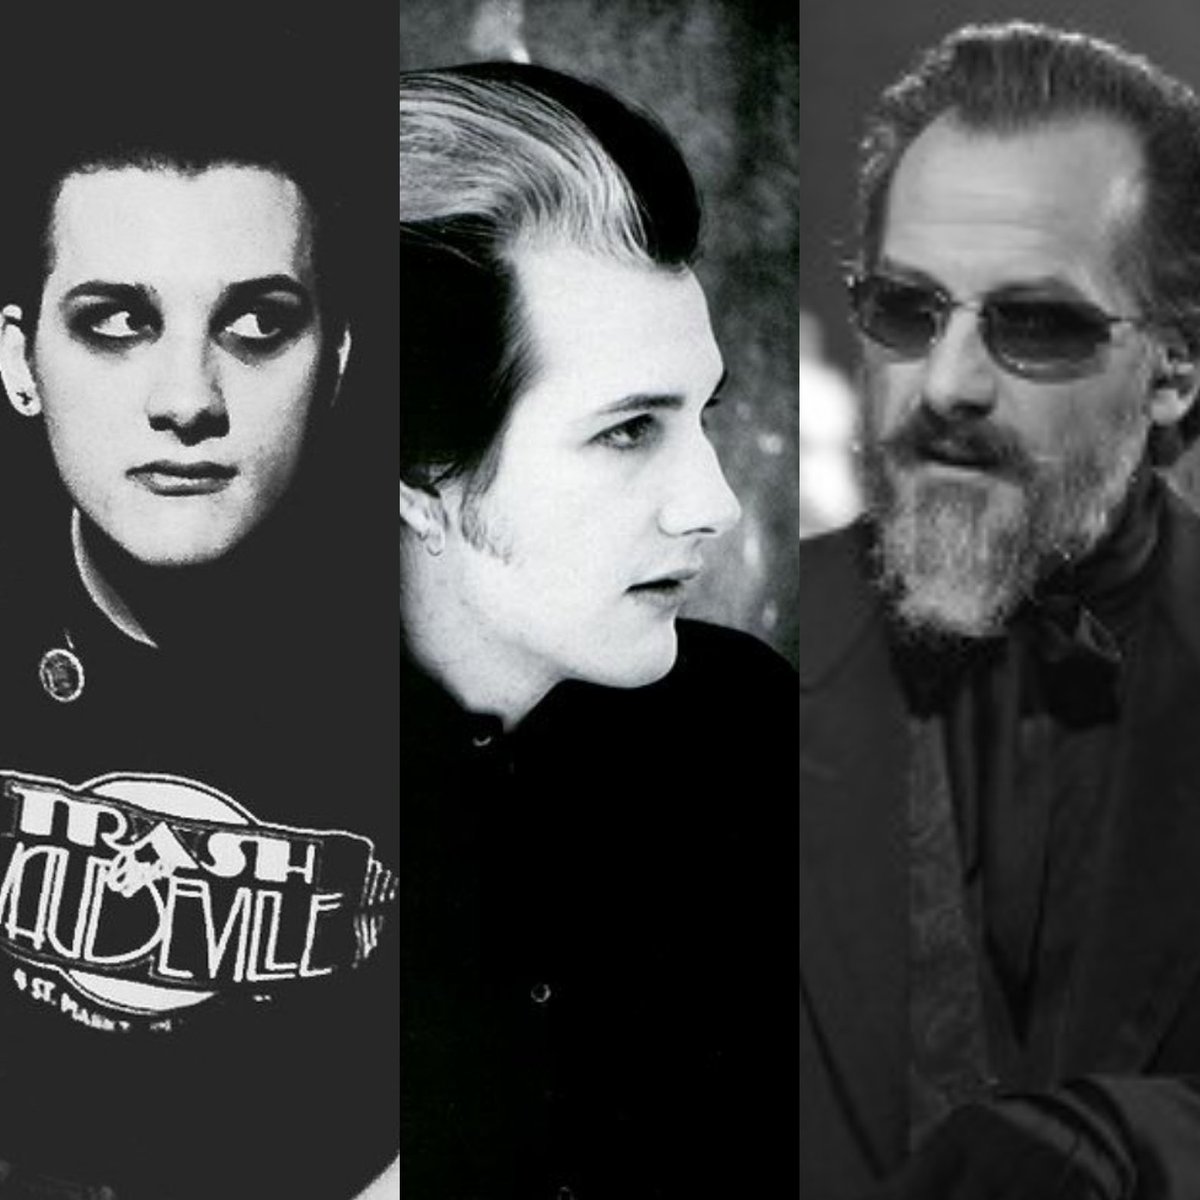 Happy birthday
#DaveVanian..
What are your favourite 
tracks by The Damned?